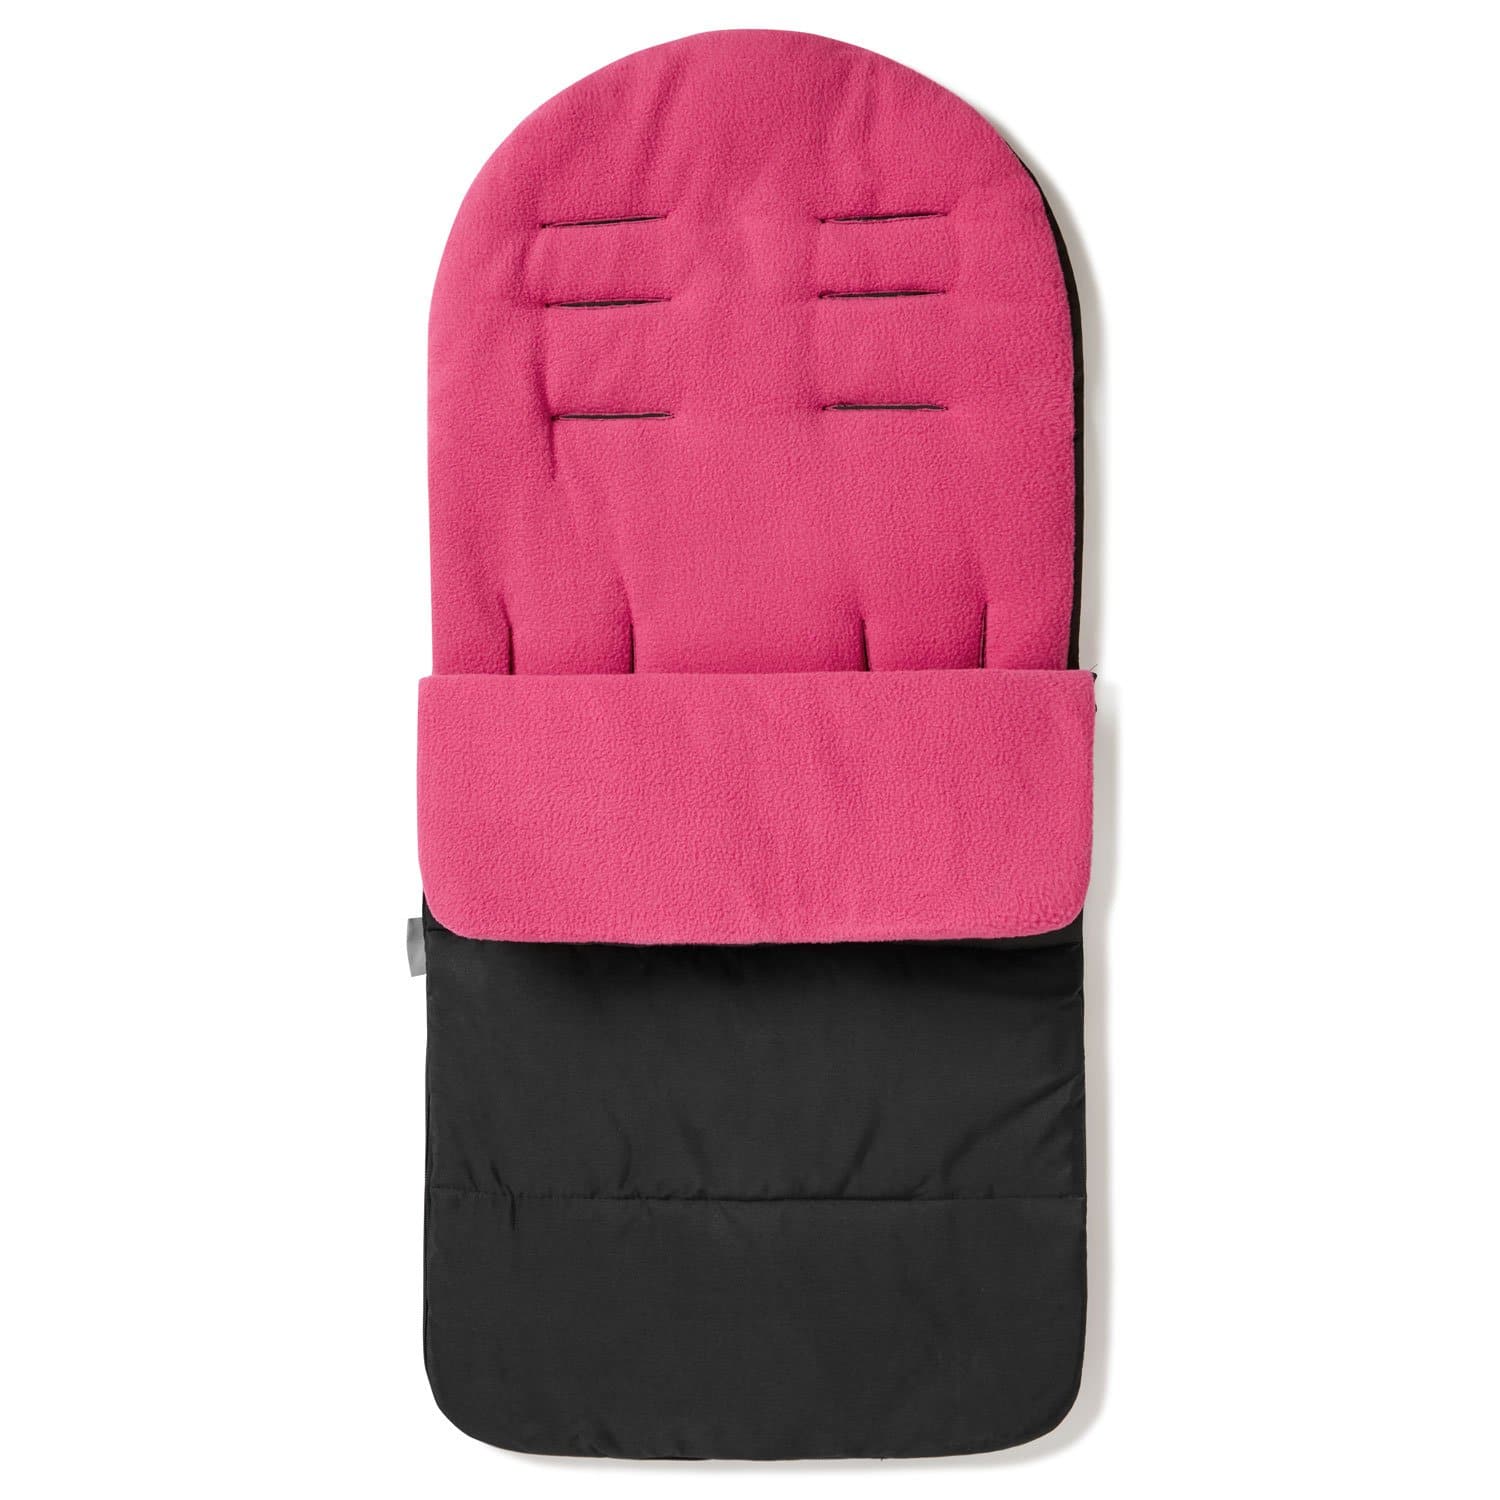 Premium Footmuff / Cosy Toes Compatible with Babylo - Pink Rose / Fits All Models | For Your Little One